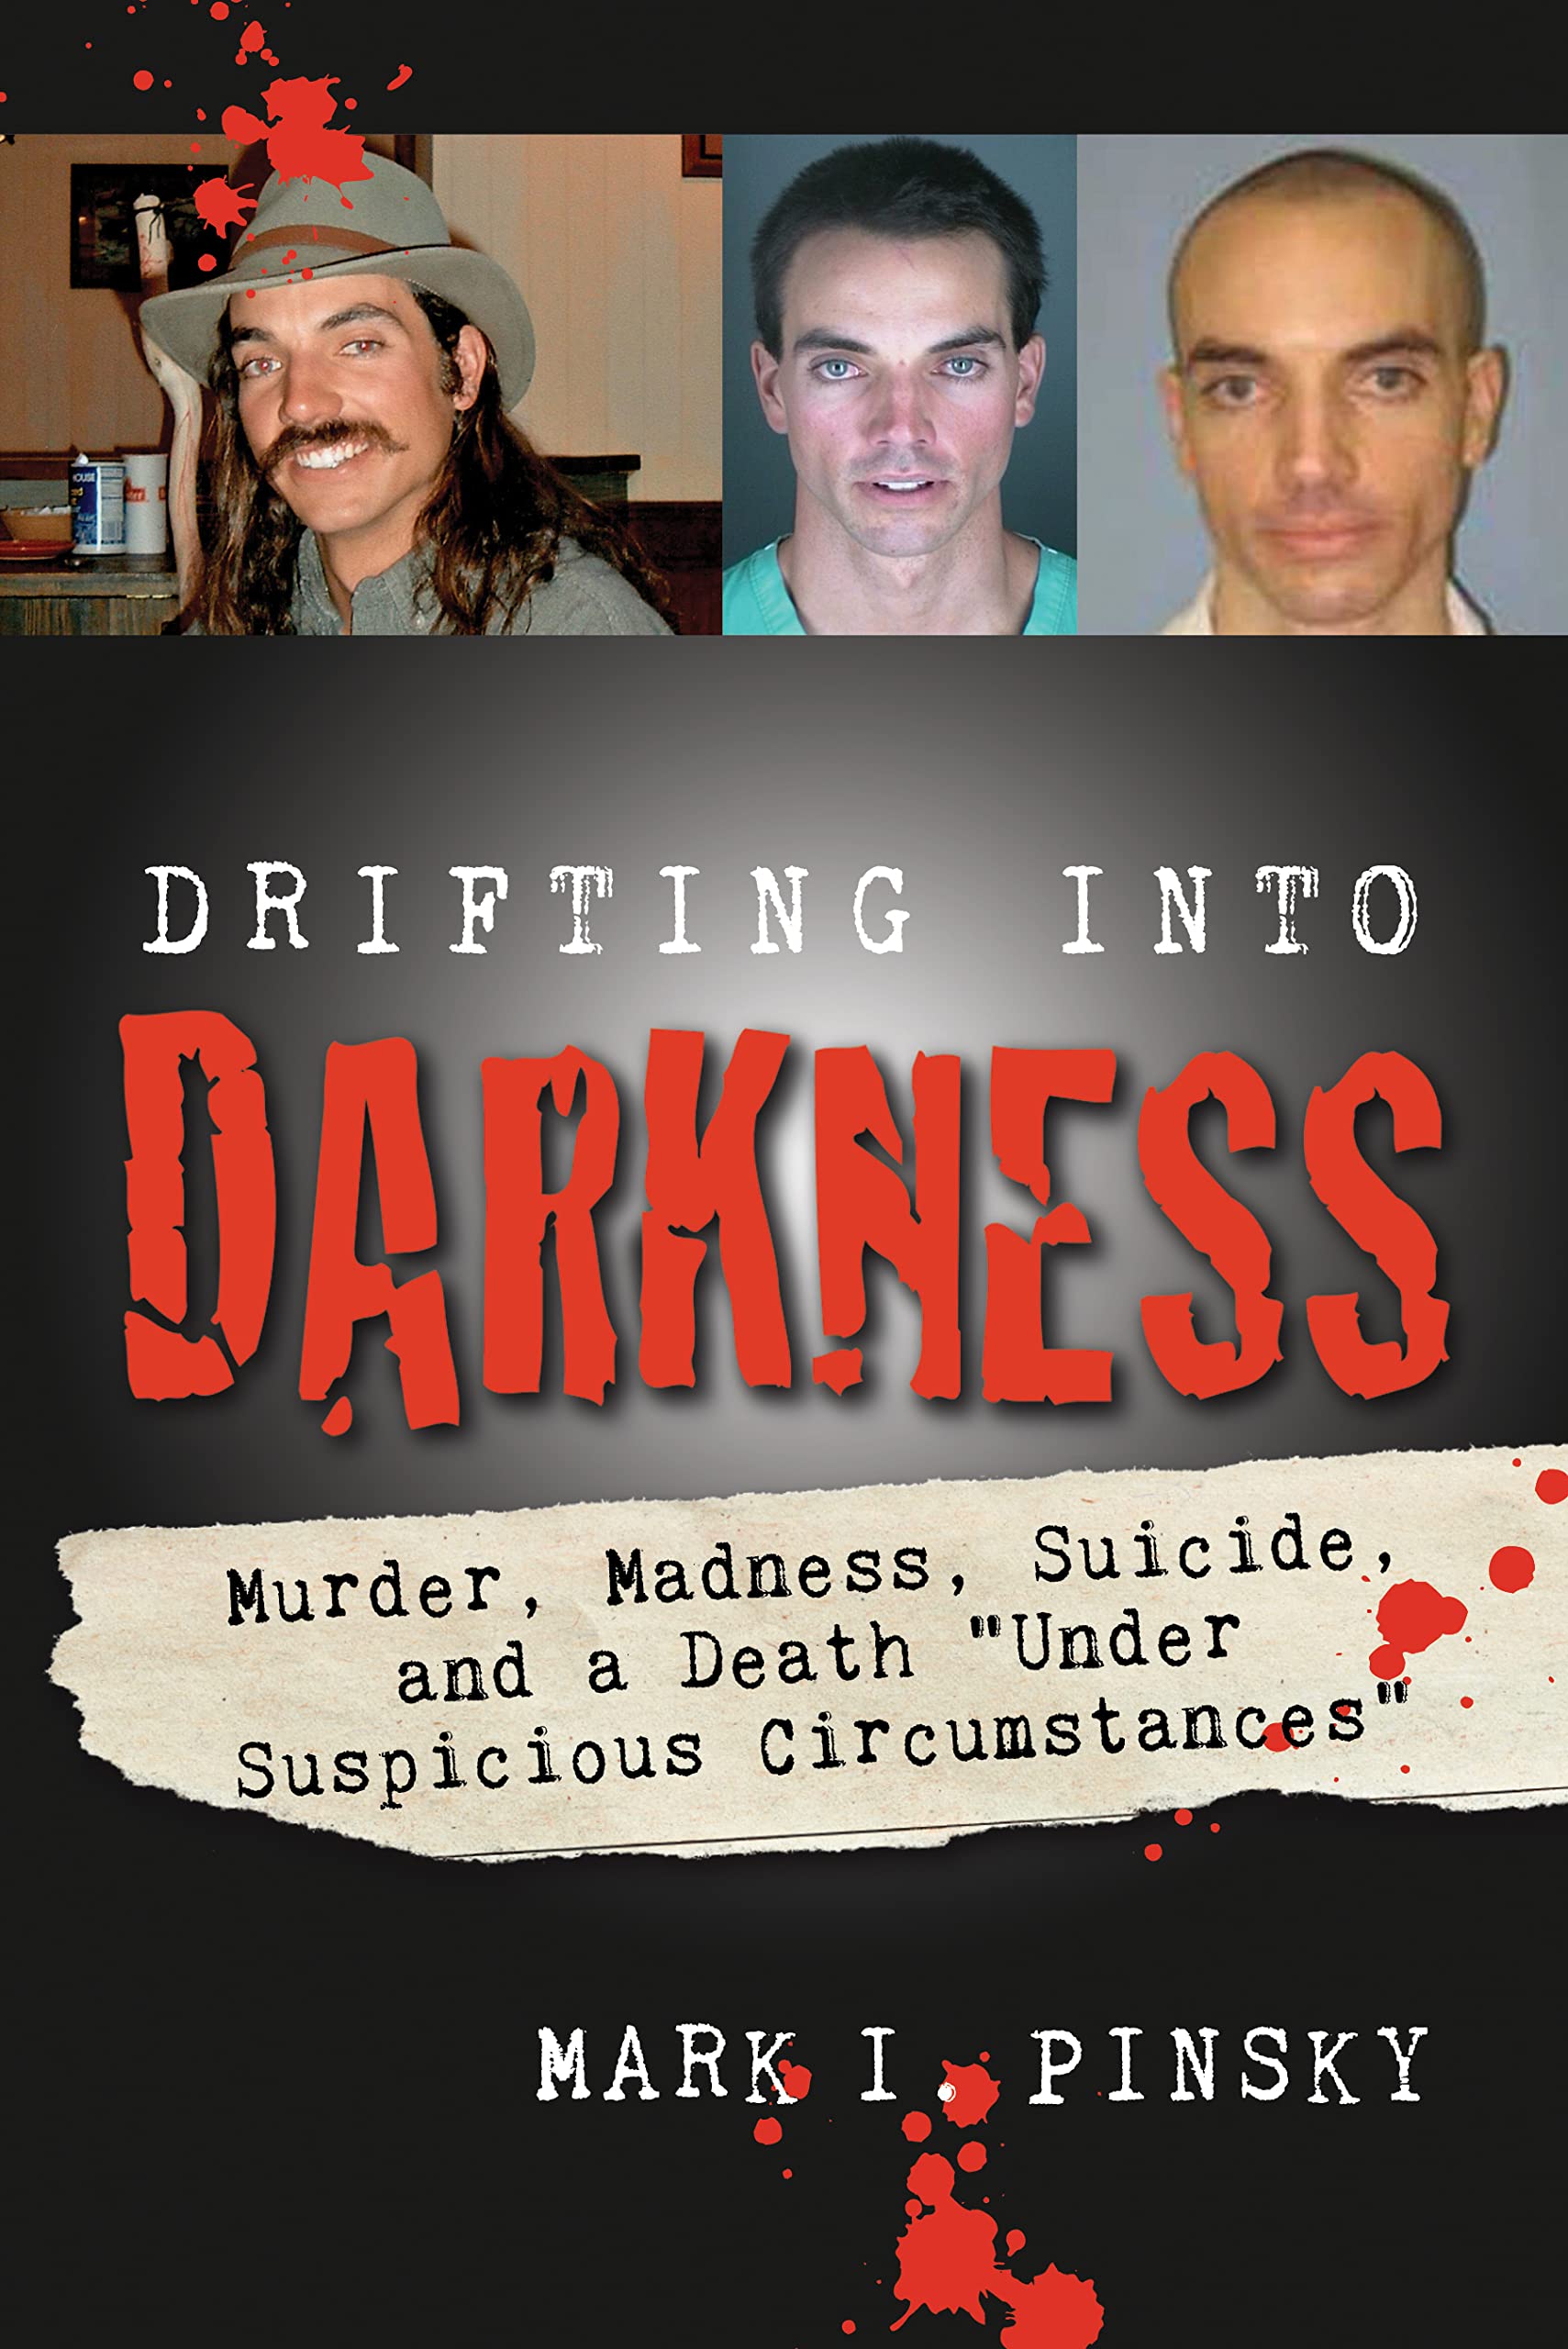 Drifting into Darkness: Murders, Madness, Suicide, and a Death “Under Suspicious Circumstances”